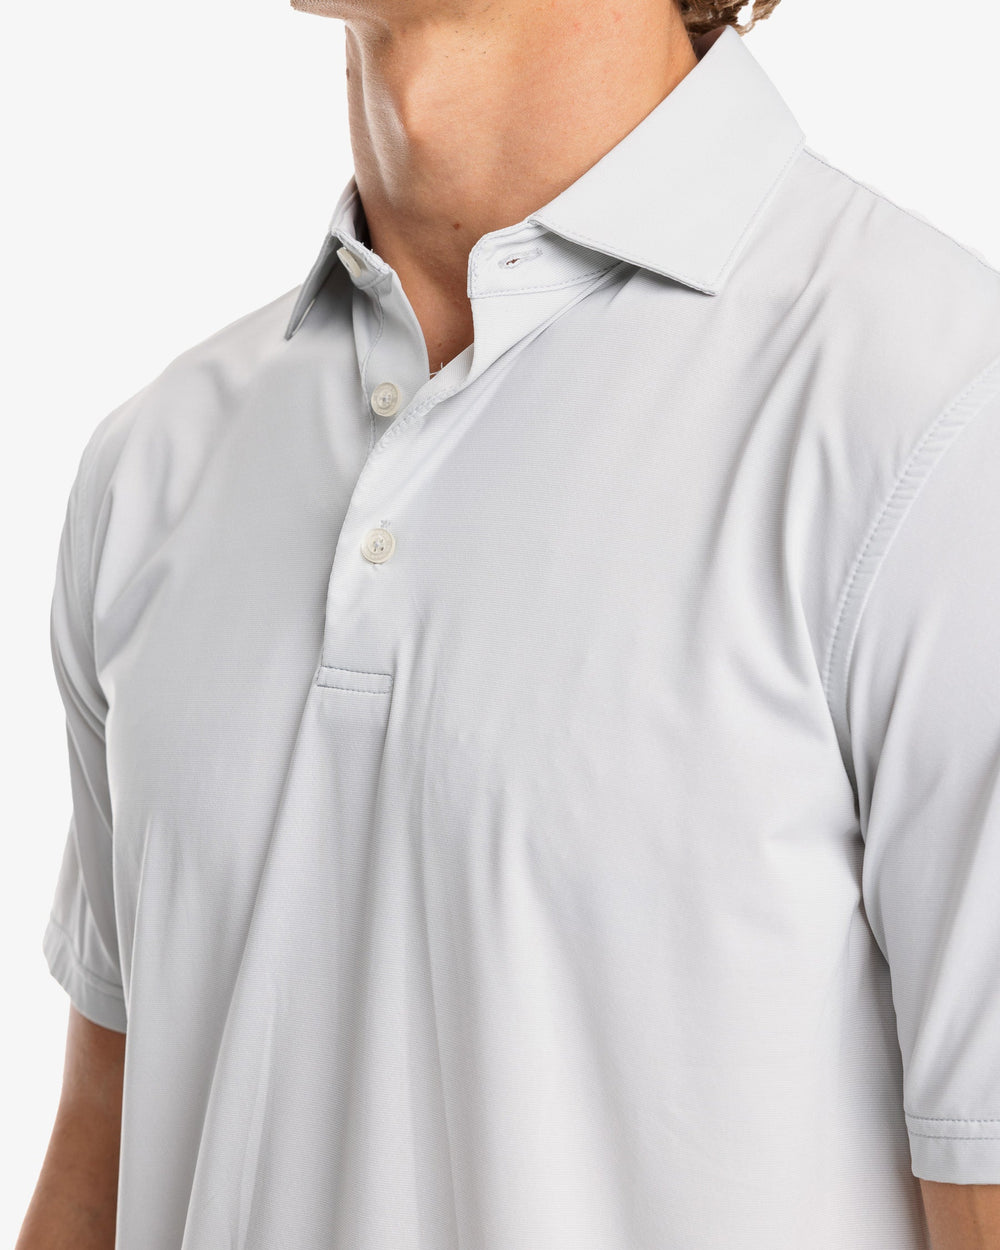 The model detail view of the Men's Sawgrass Stripe brrr°®-eeze Performance Polo Shirt by Southern Tide - Seagull Grey